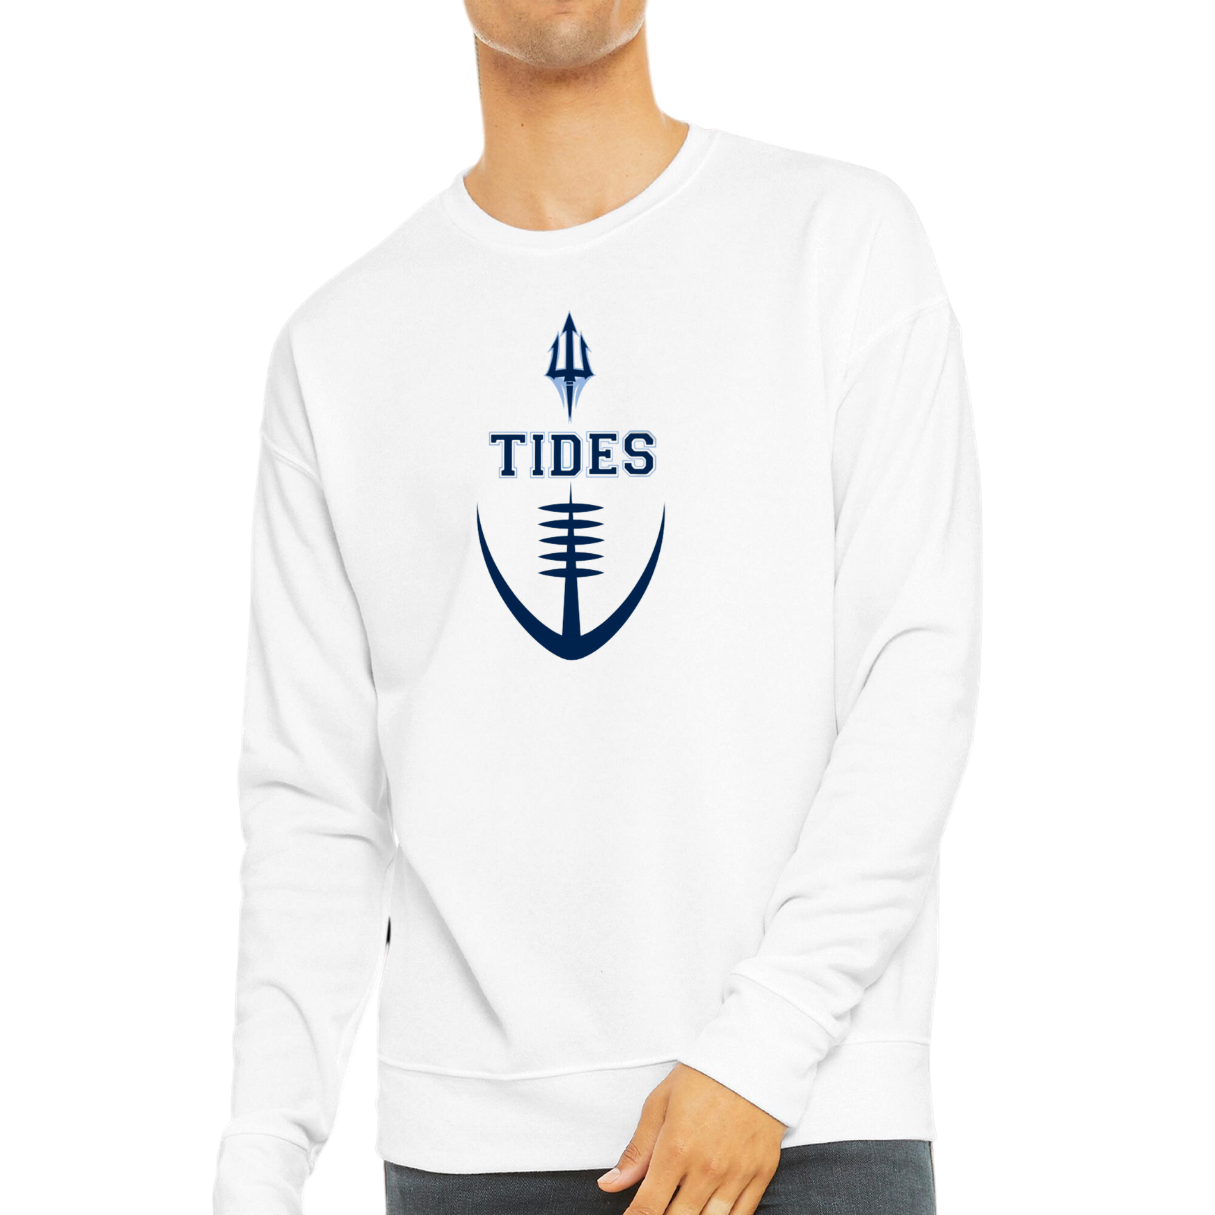 Tides Football Trident Crewneck - Adult and Youth